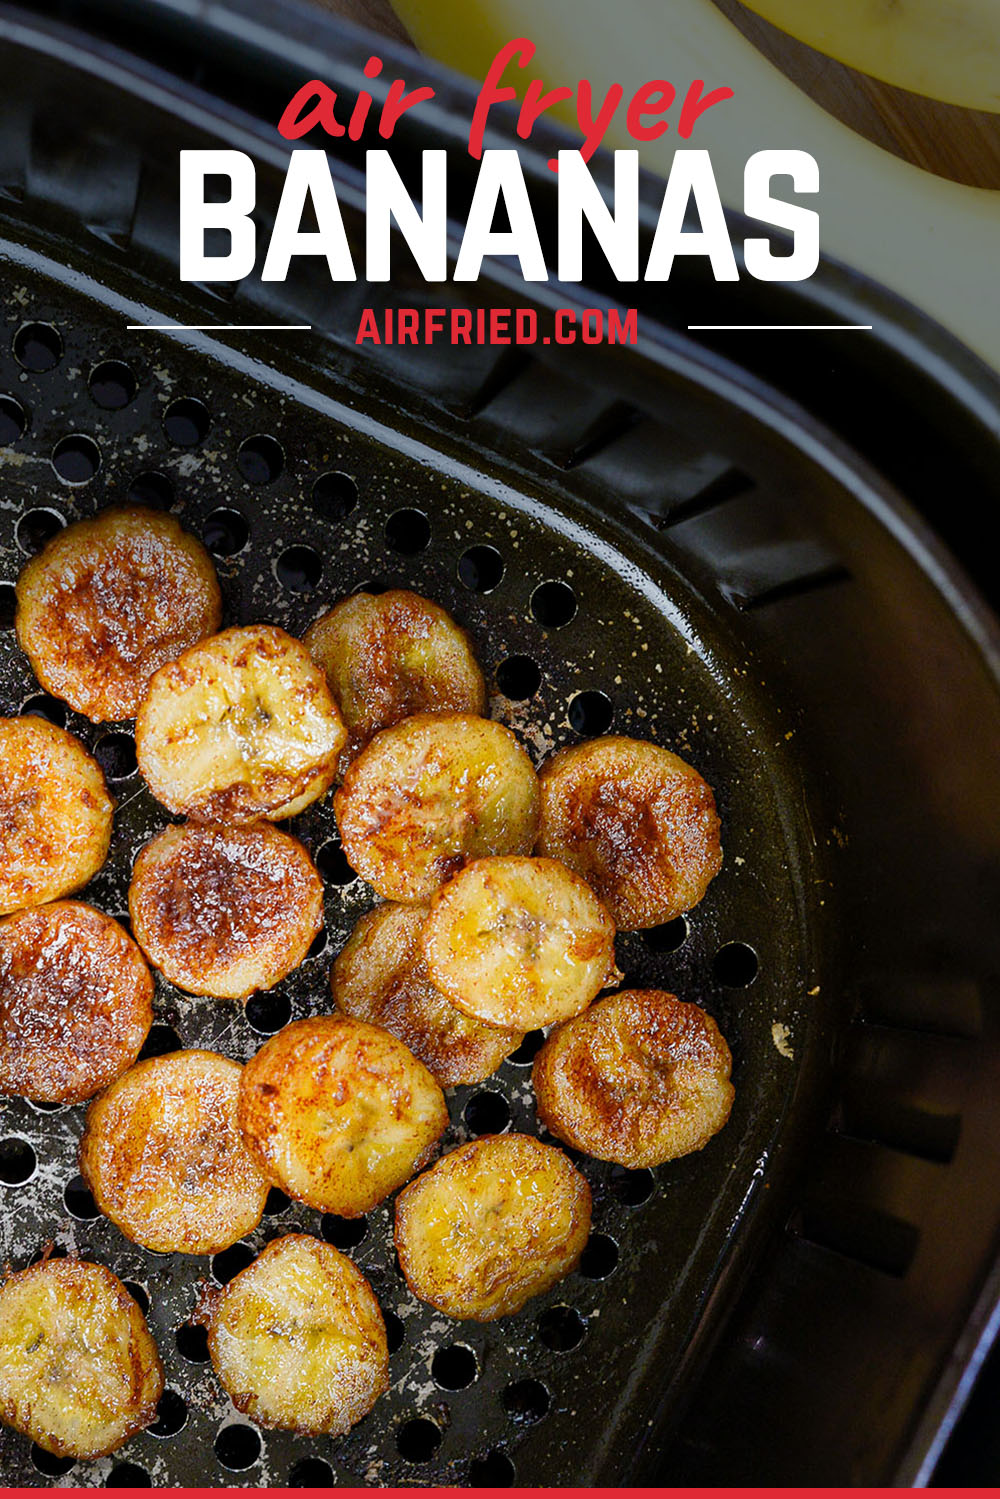 These air fryer bananas are so simple and so sweet, there is no reason not to give them a try!